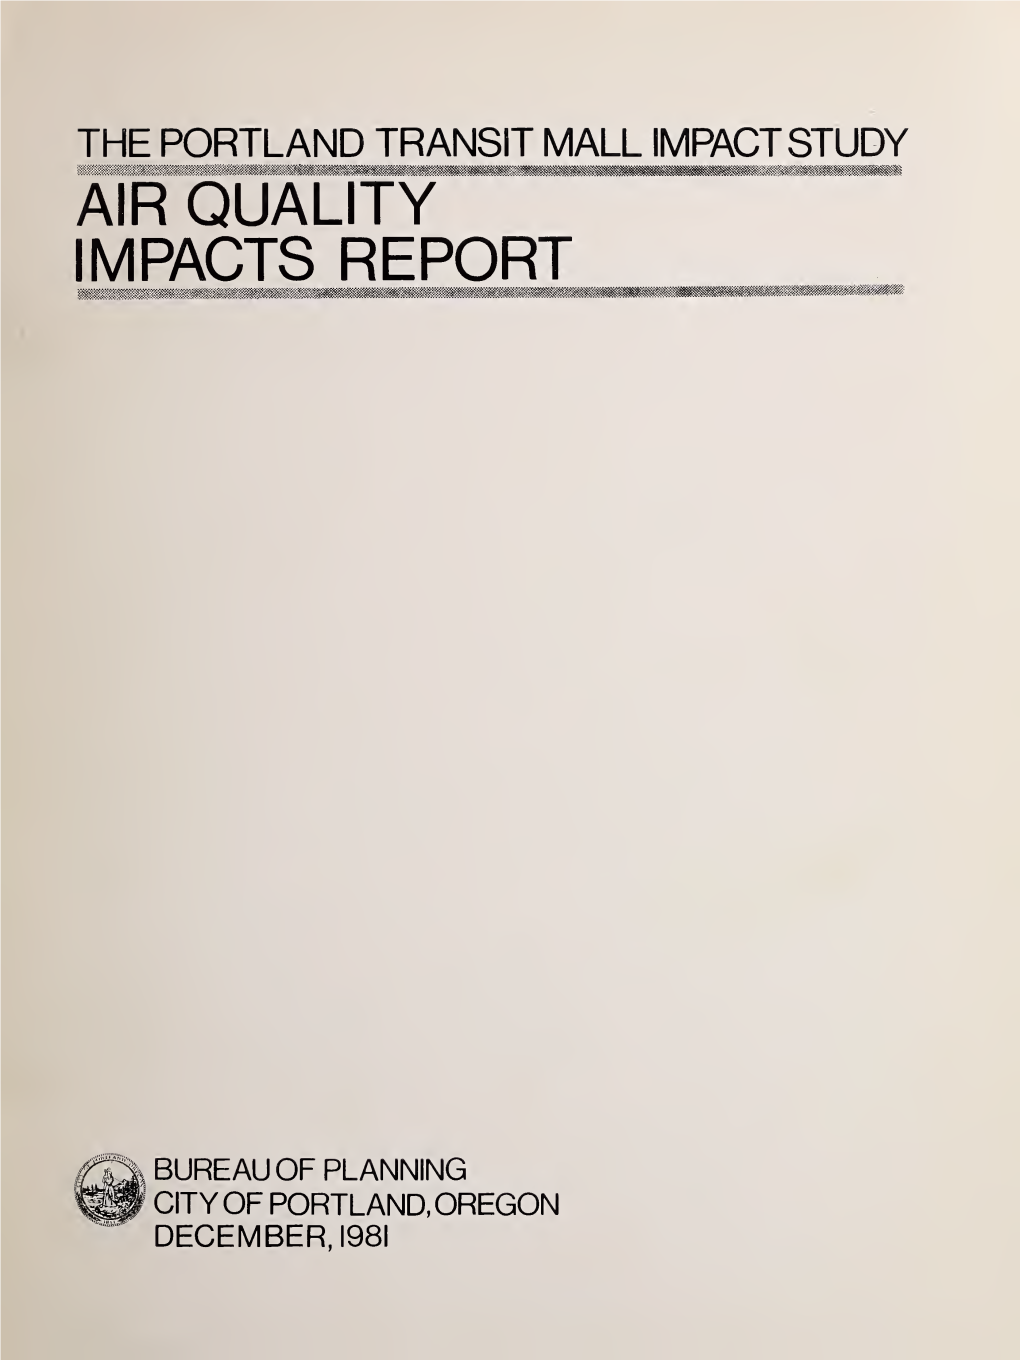 The Portland Transit Mall Impact Study Air Quality Impacts Report December, 1981